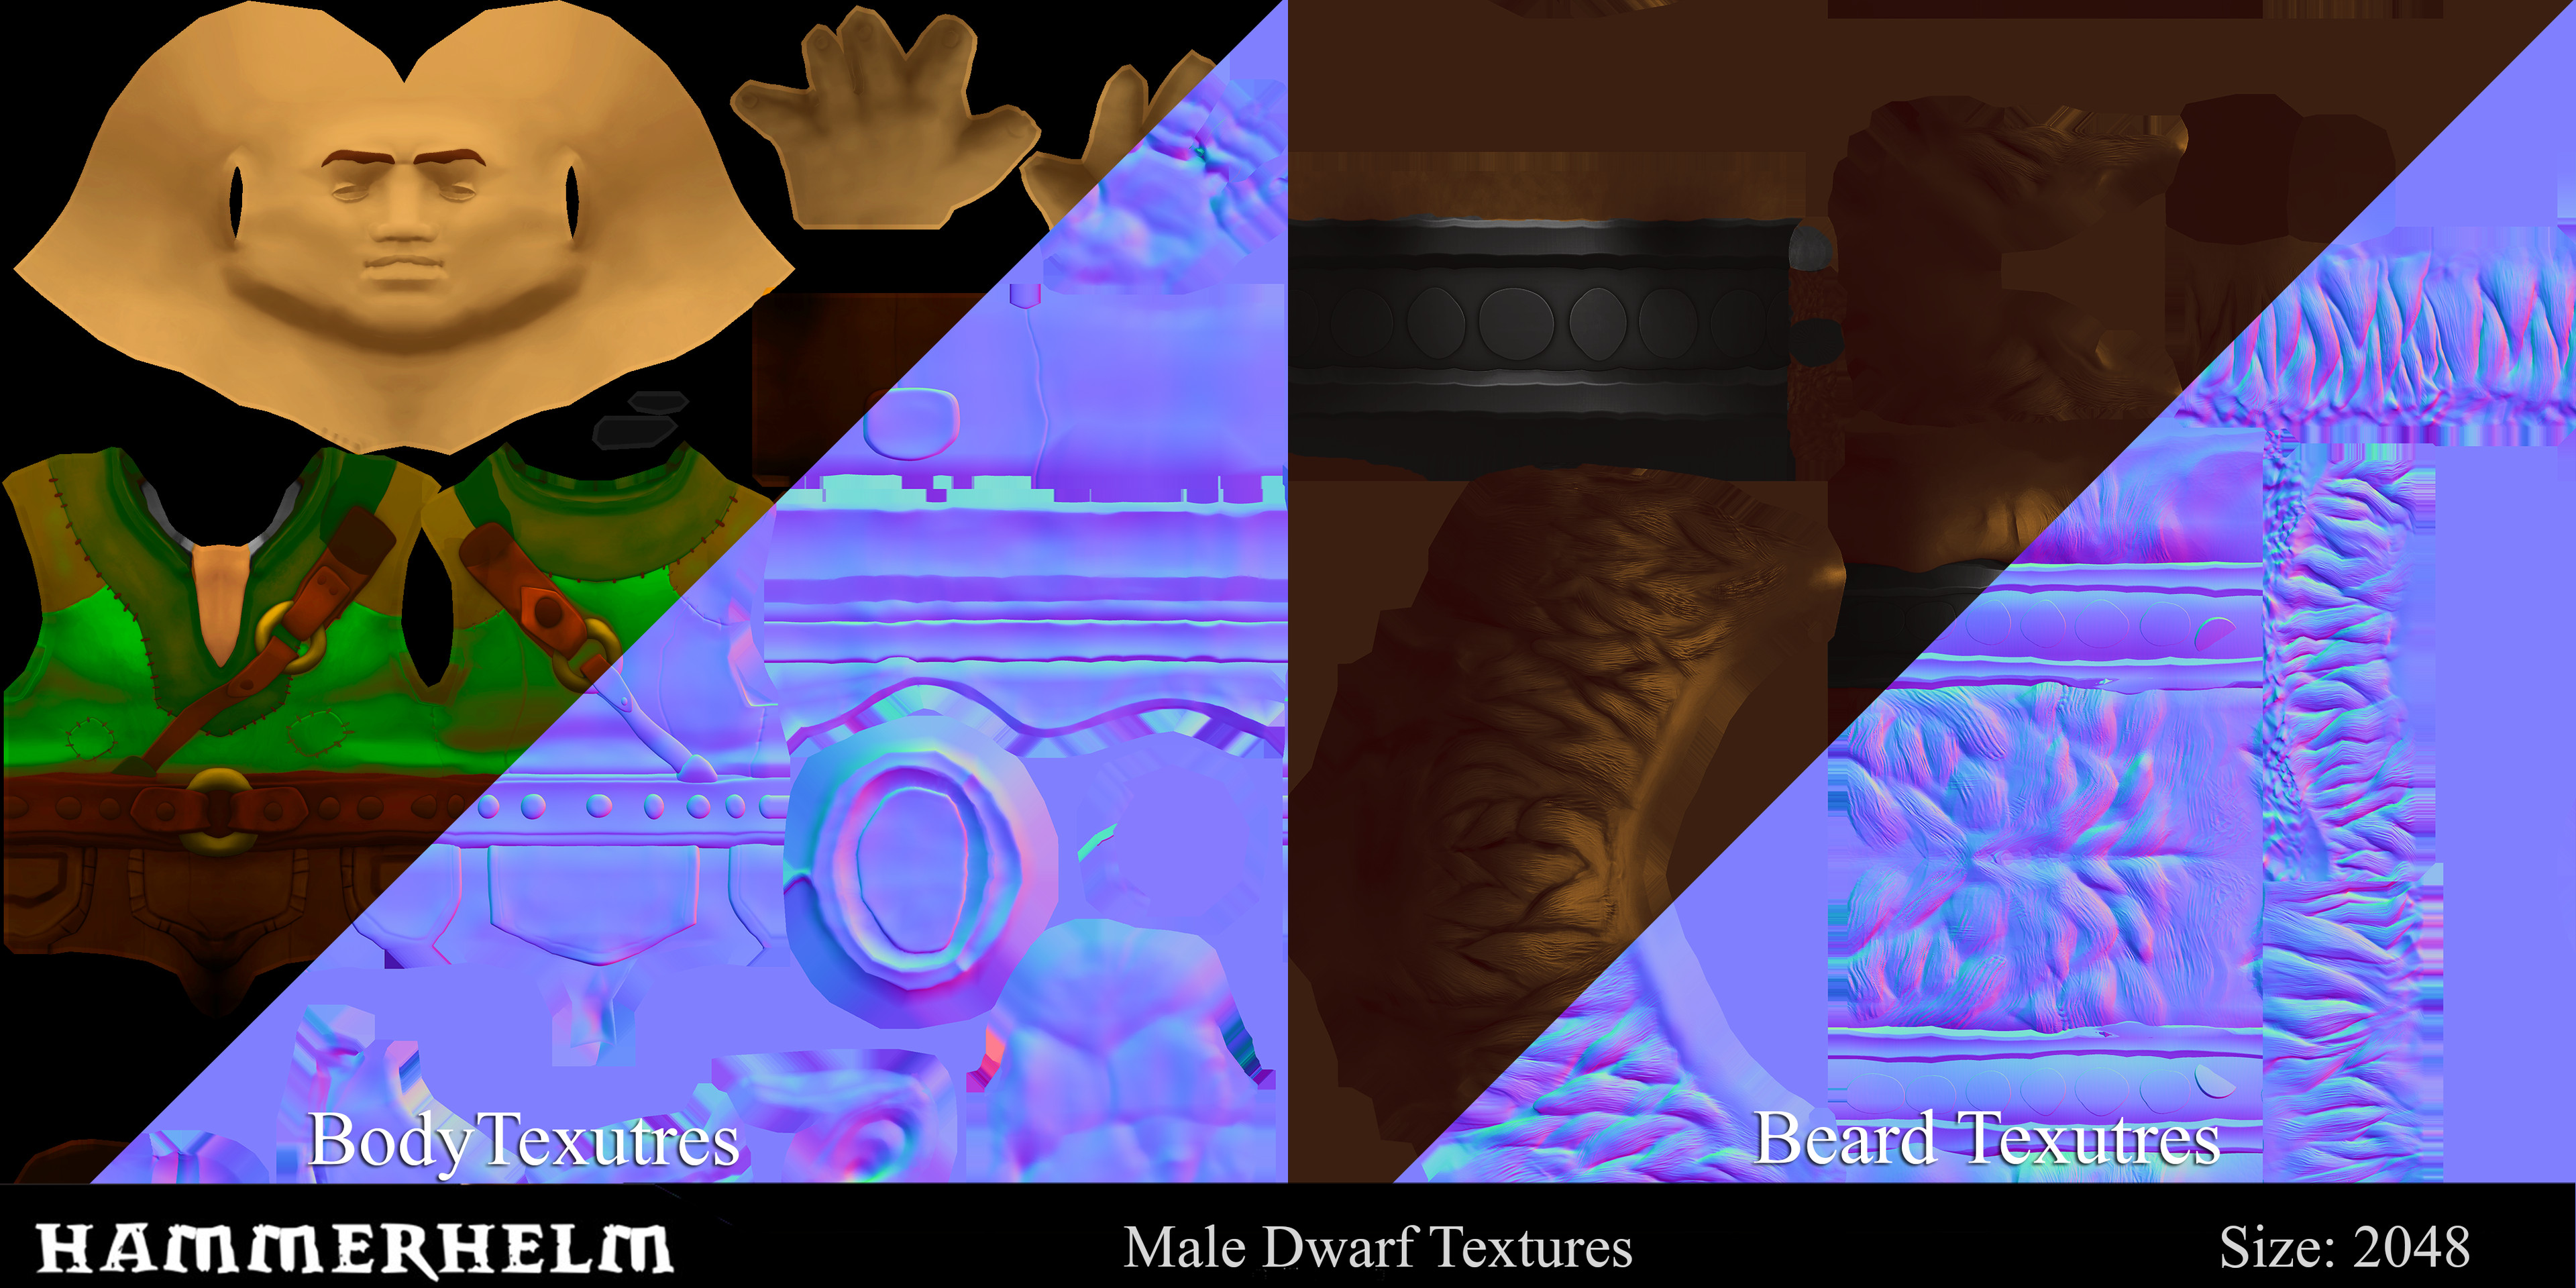 Texture Breakdown of Male Character